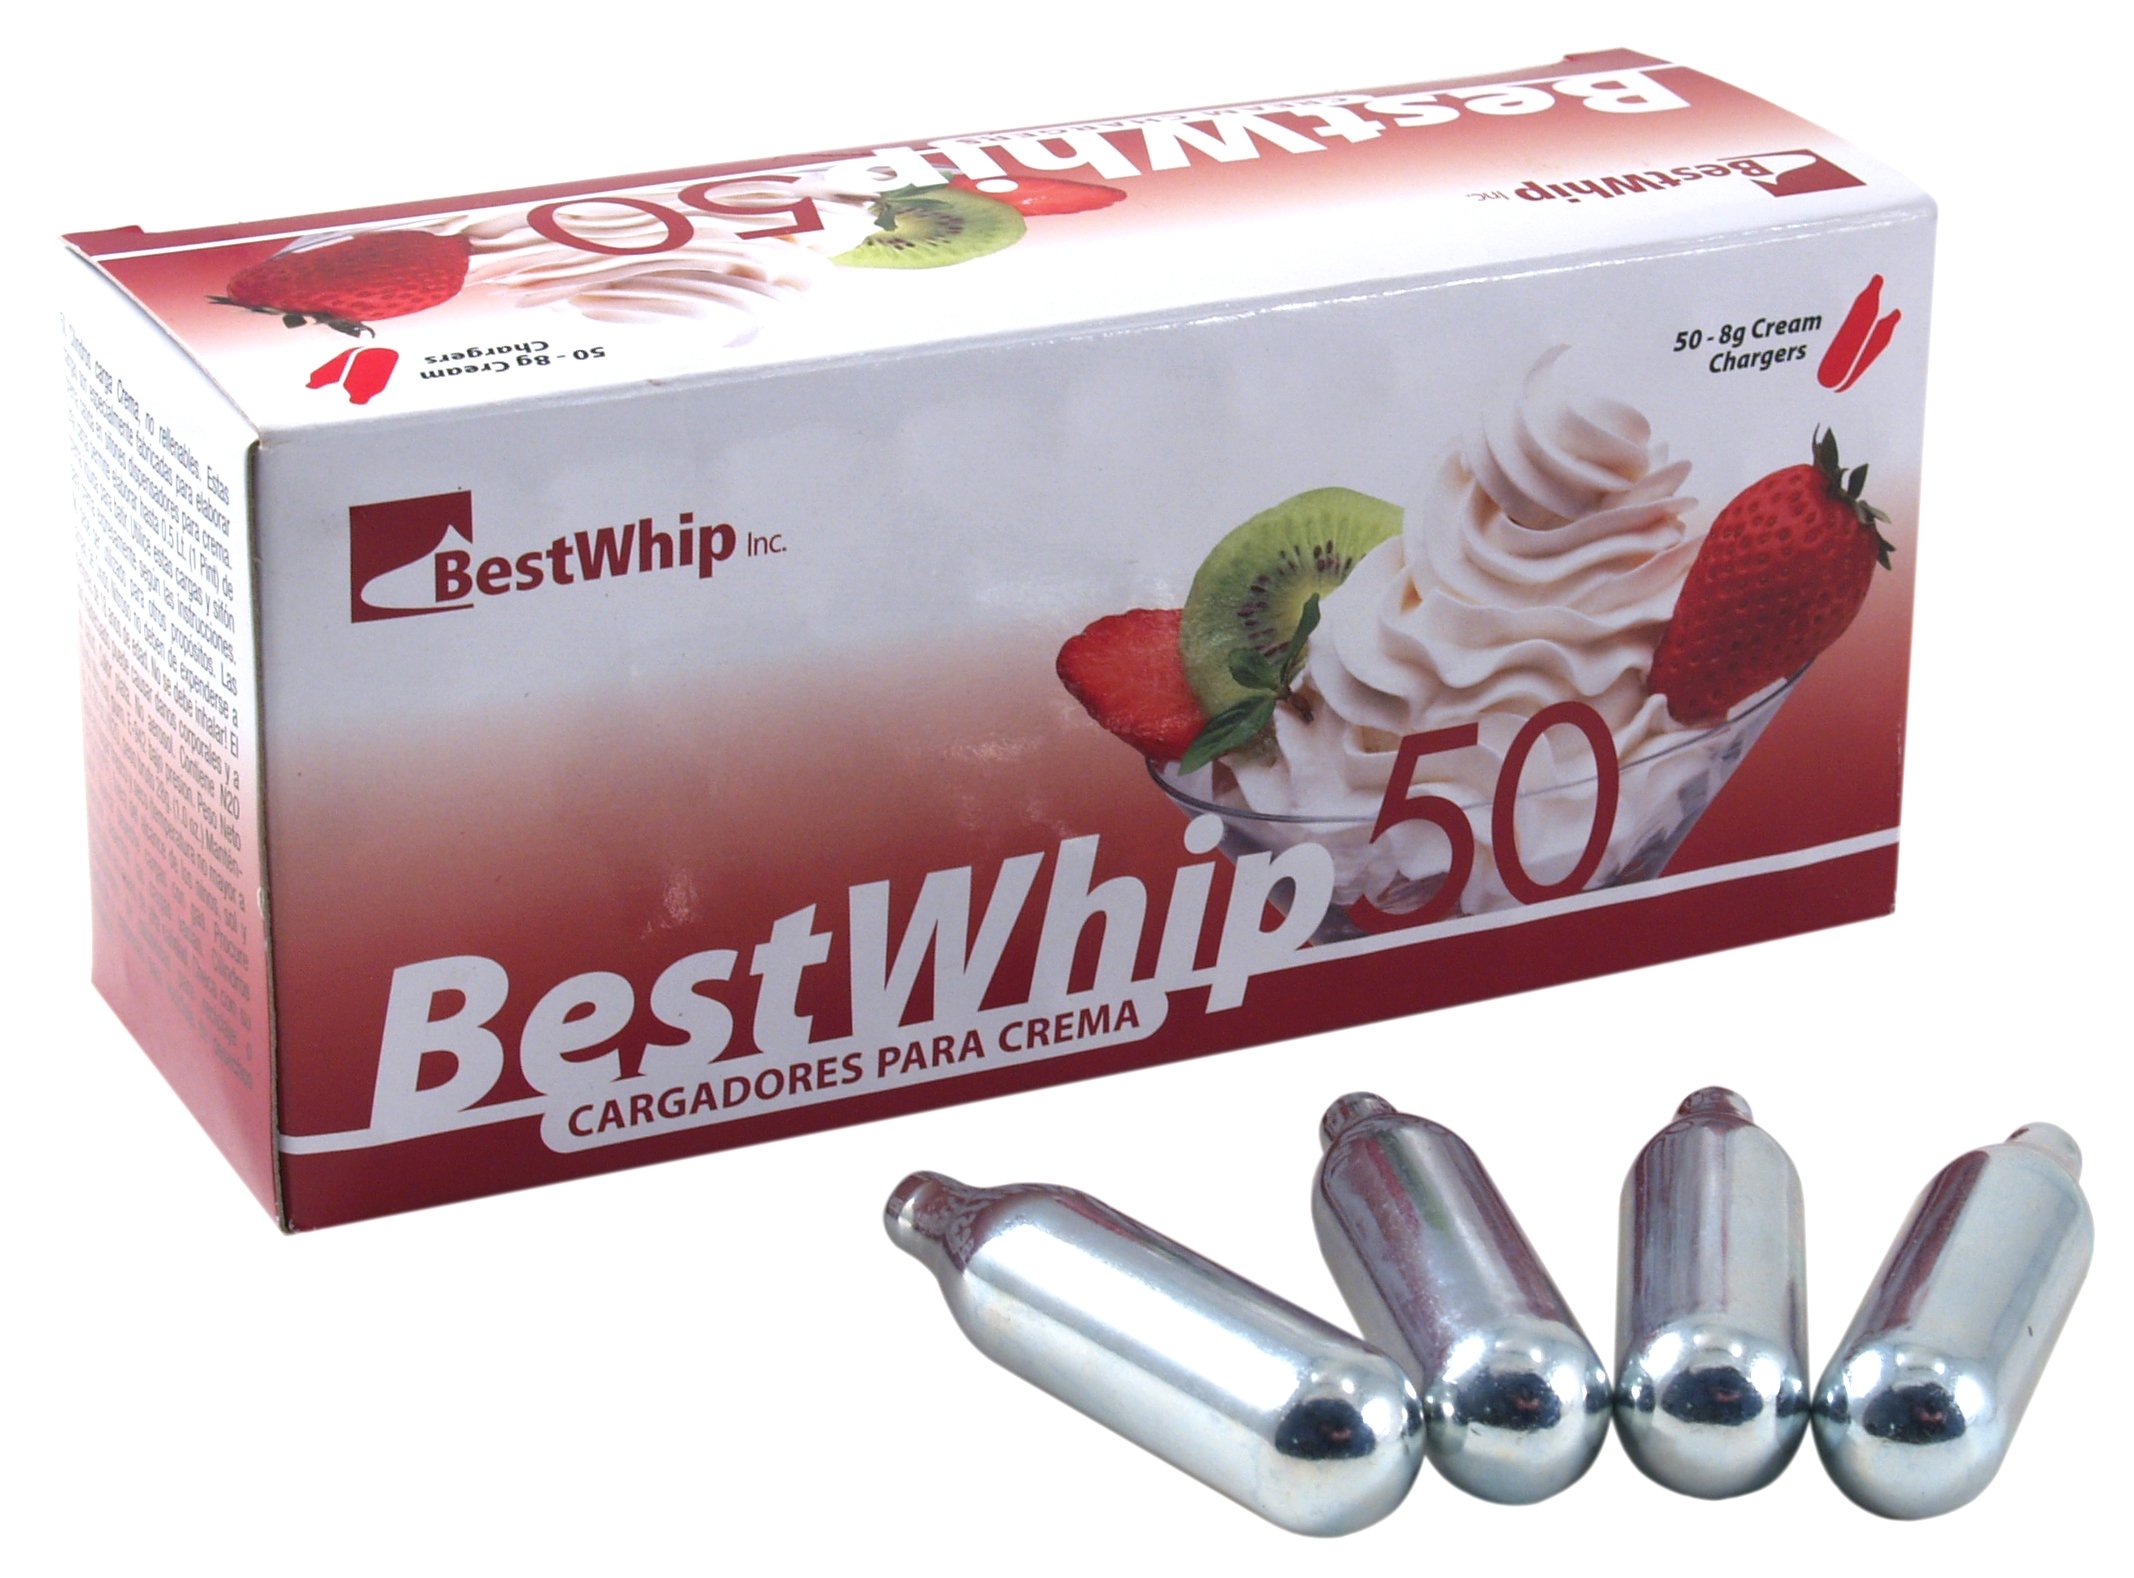 Best Whip N20 Whipped Cream Chargers, 600 Count